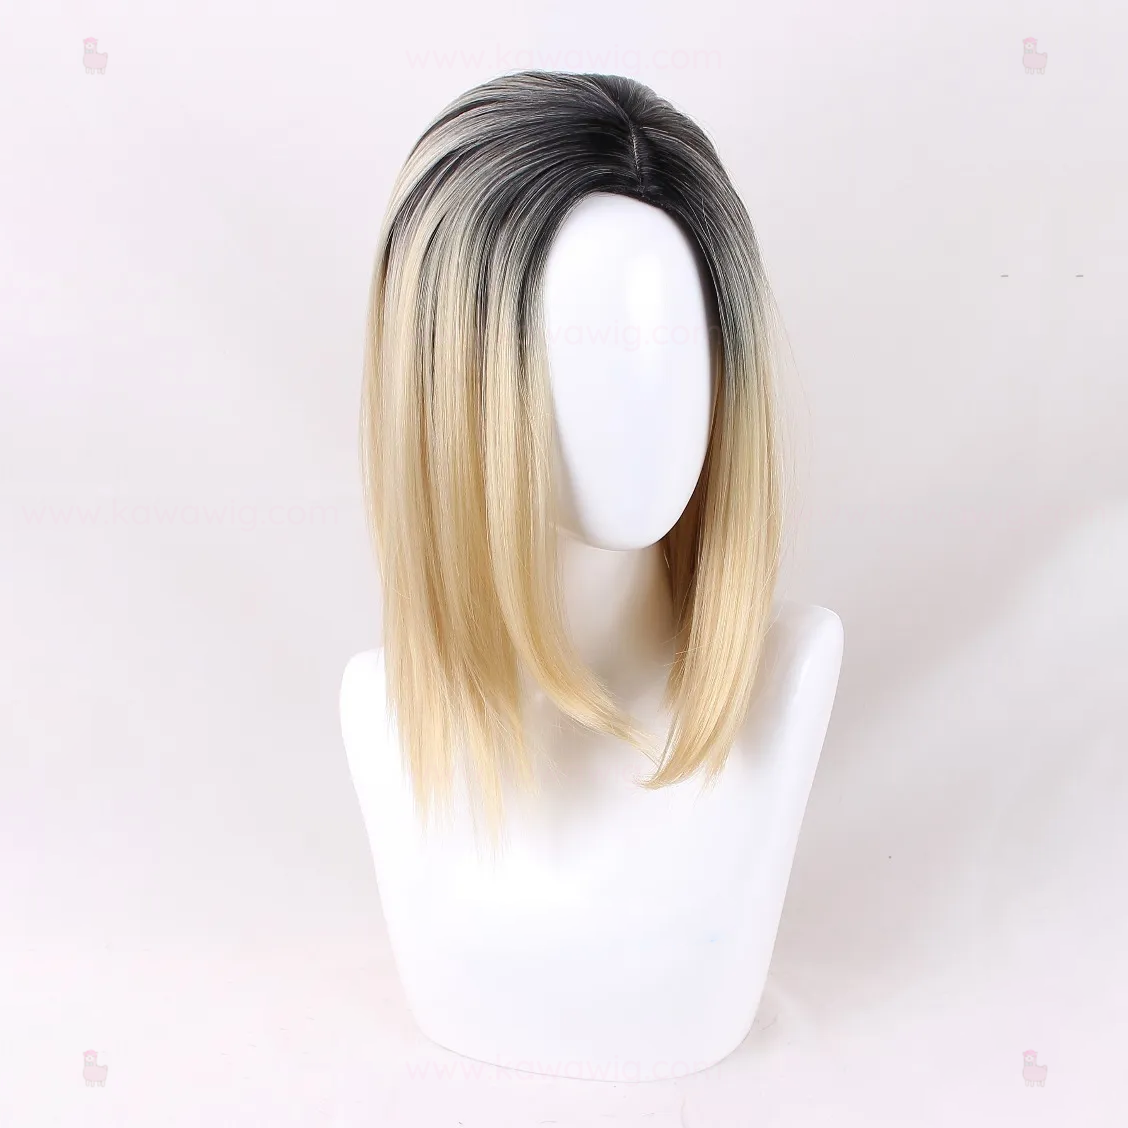 Double Trouble Collection - Halloween's Doll Bride Wig